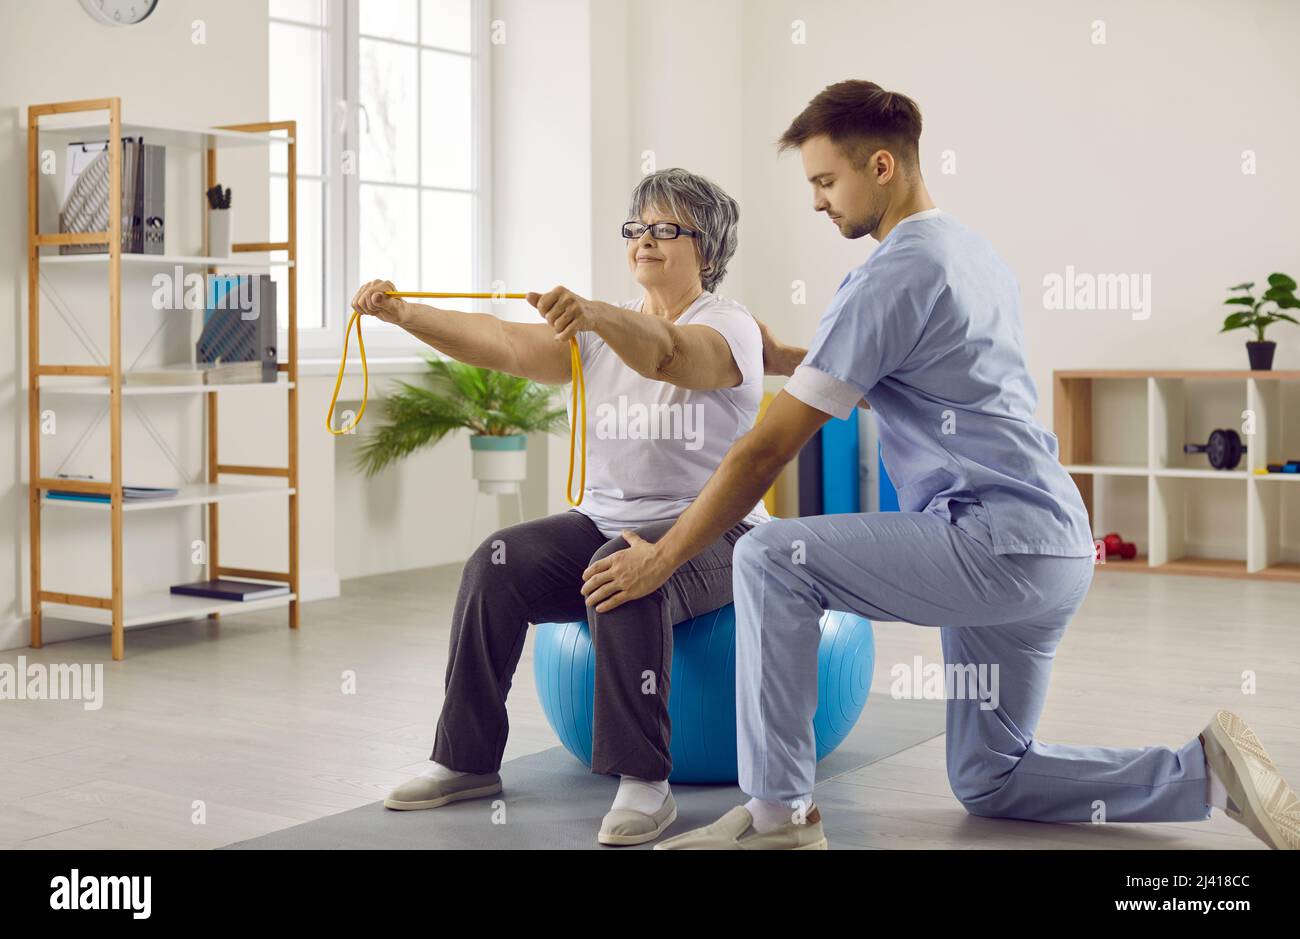 Doctor helping senior patient with osteoporosis do physiotherapy exercises on fit ball Stock Photo